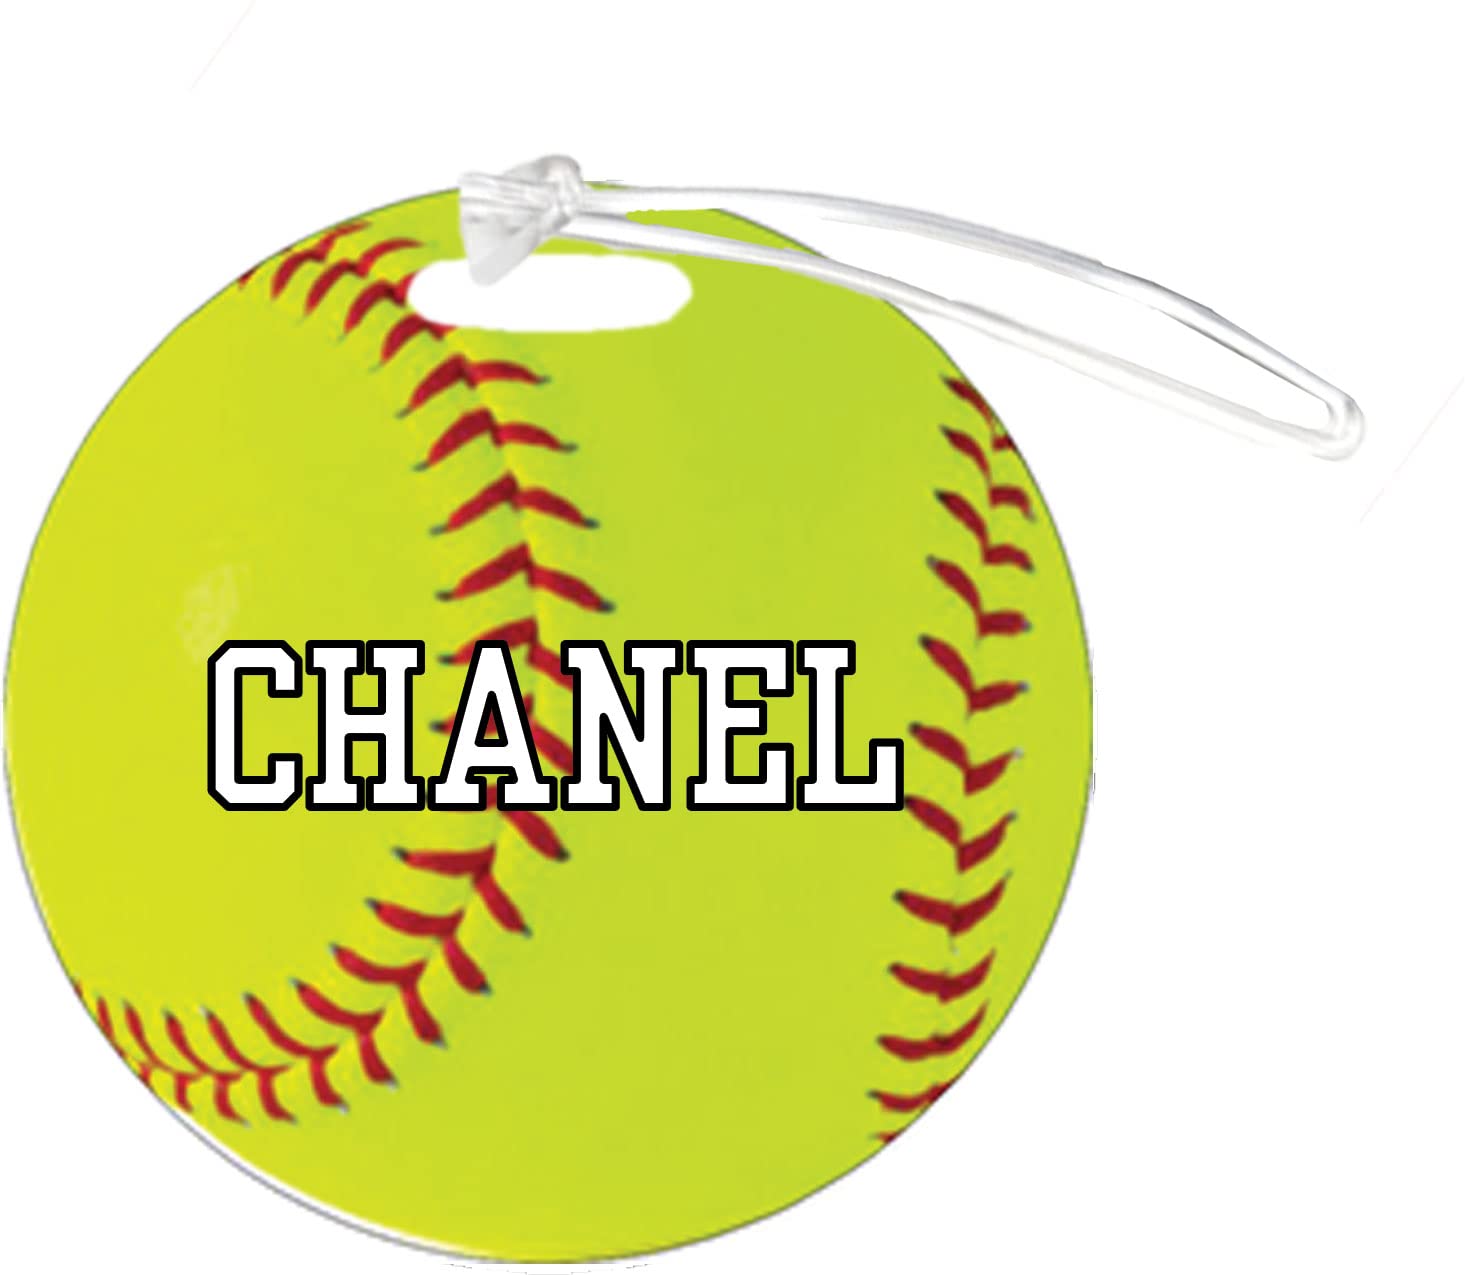 Softball Chanel Customizable 4 Inch Reinforced Plastic Luggage Bag Tag Add Any Number or Any Team Name